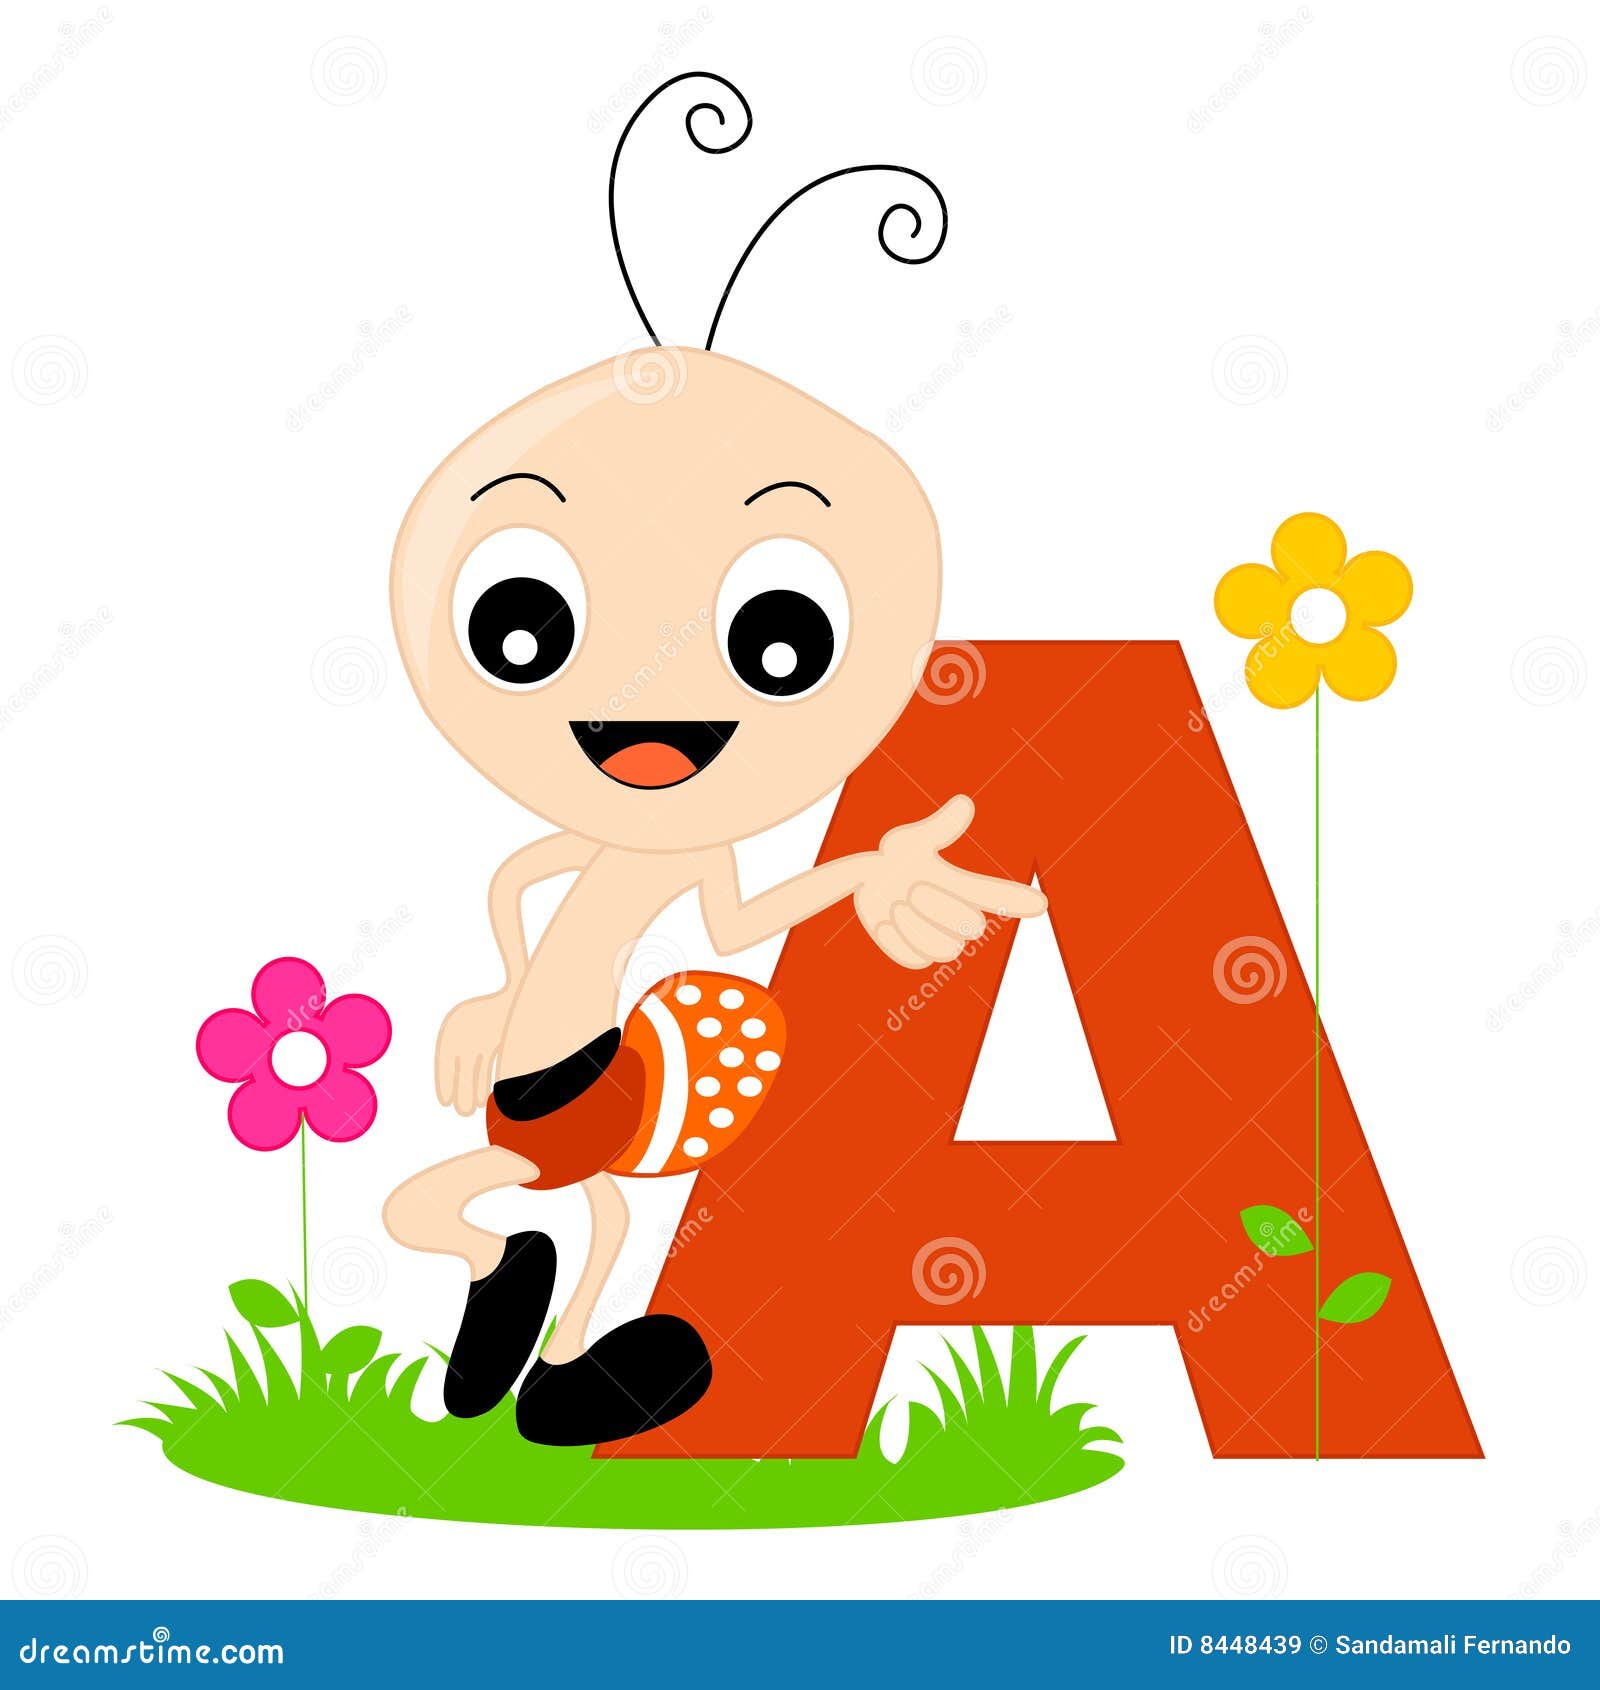 animal letters clipart - photo #11